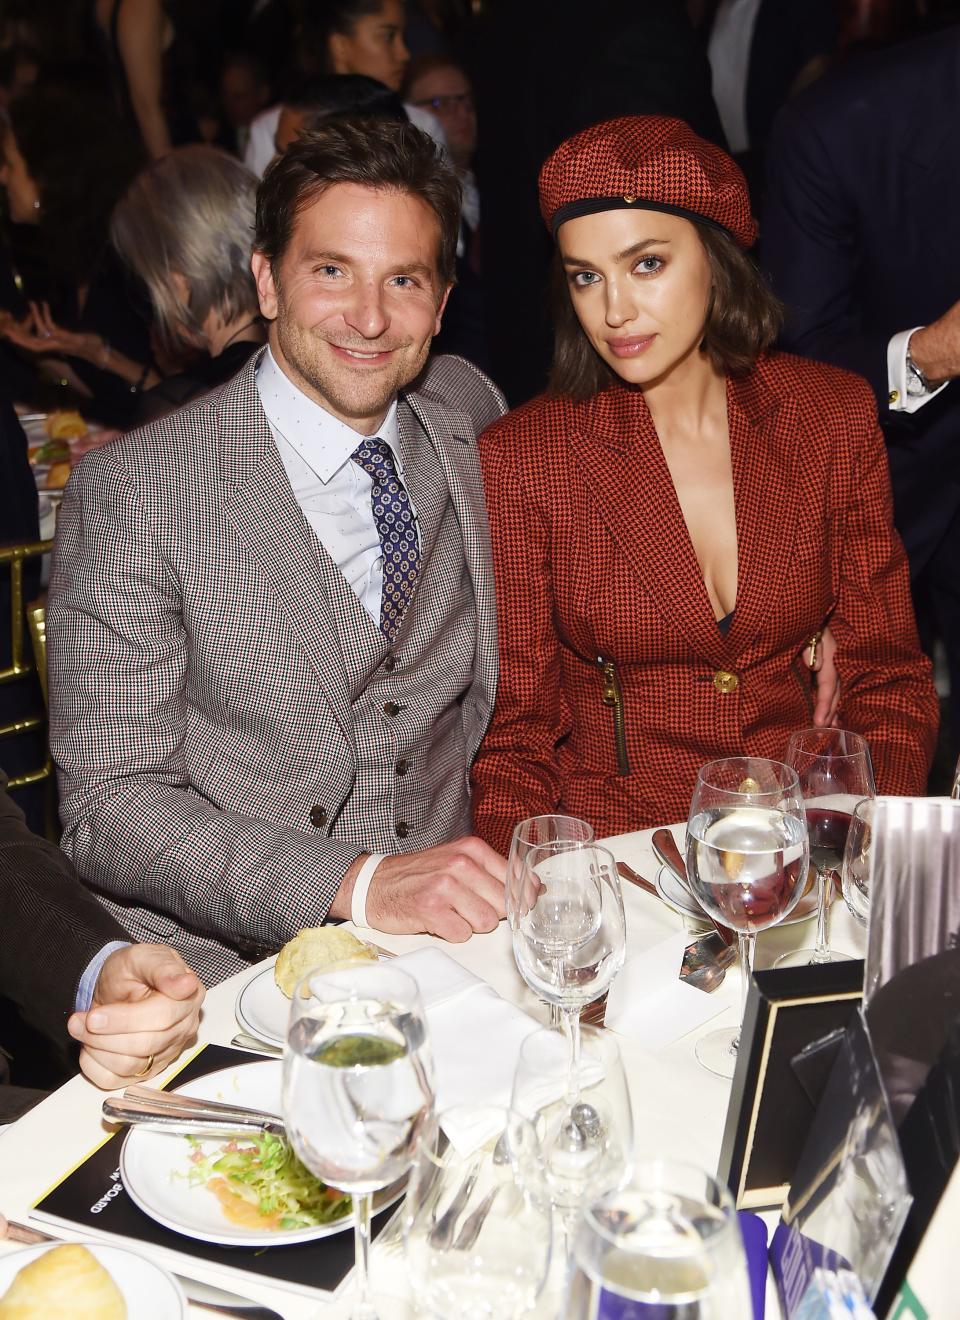 ooper and Irina Shayk attend The National Board of Review Annual Awards Gala at Cipriani 42nd Street on January 8, 2019 in New York City.